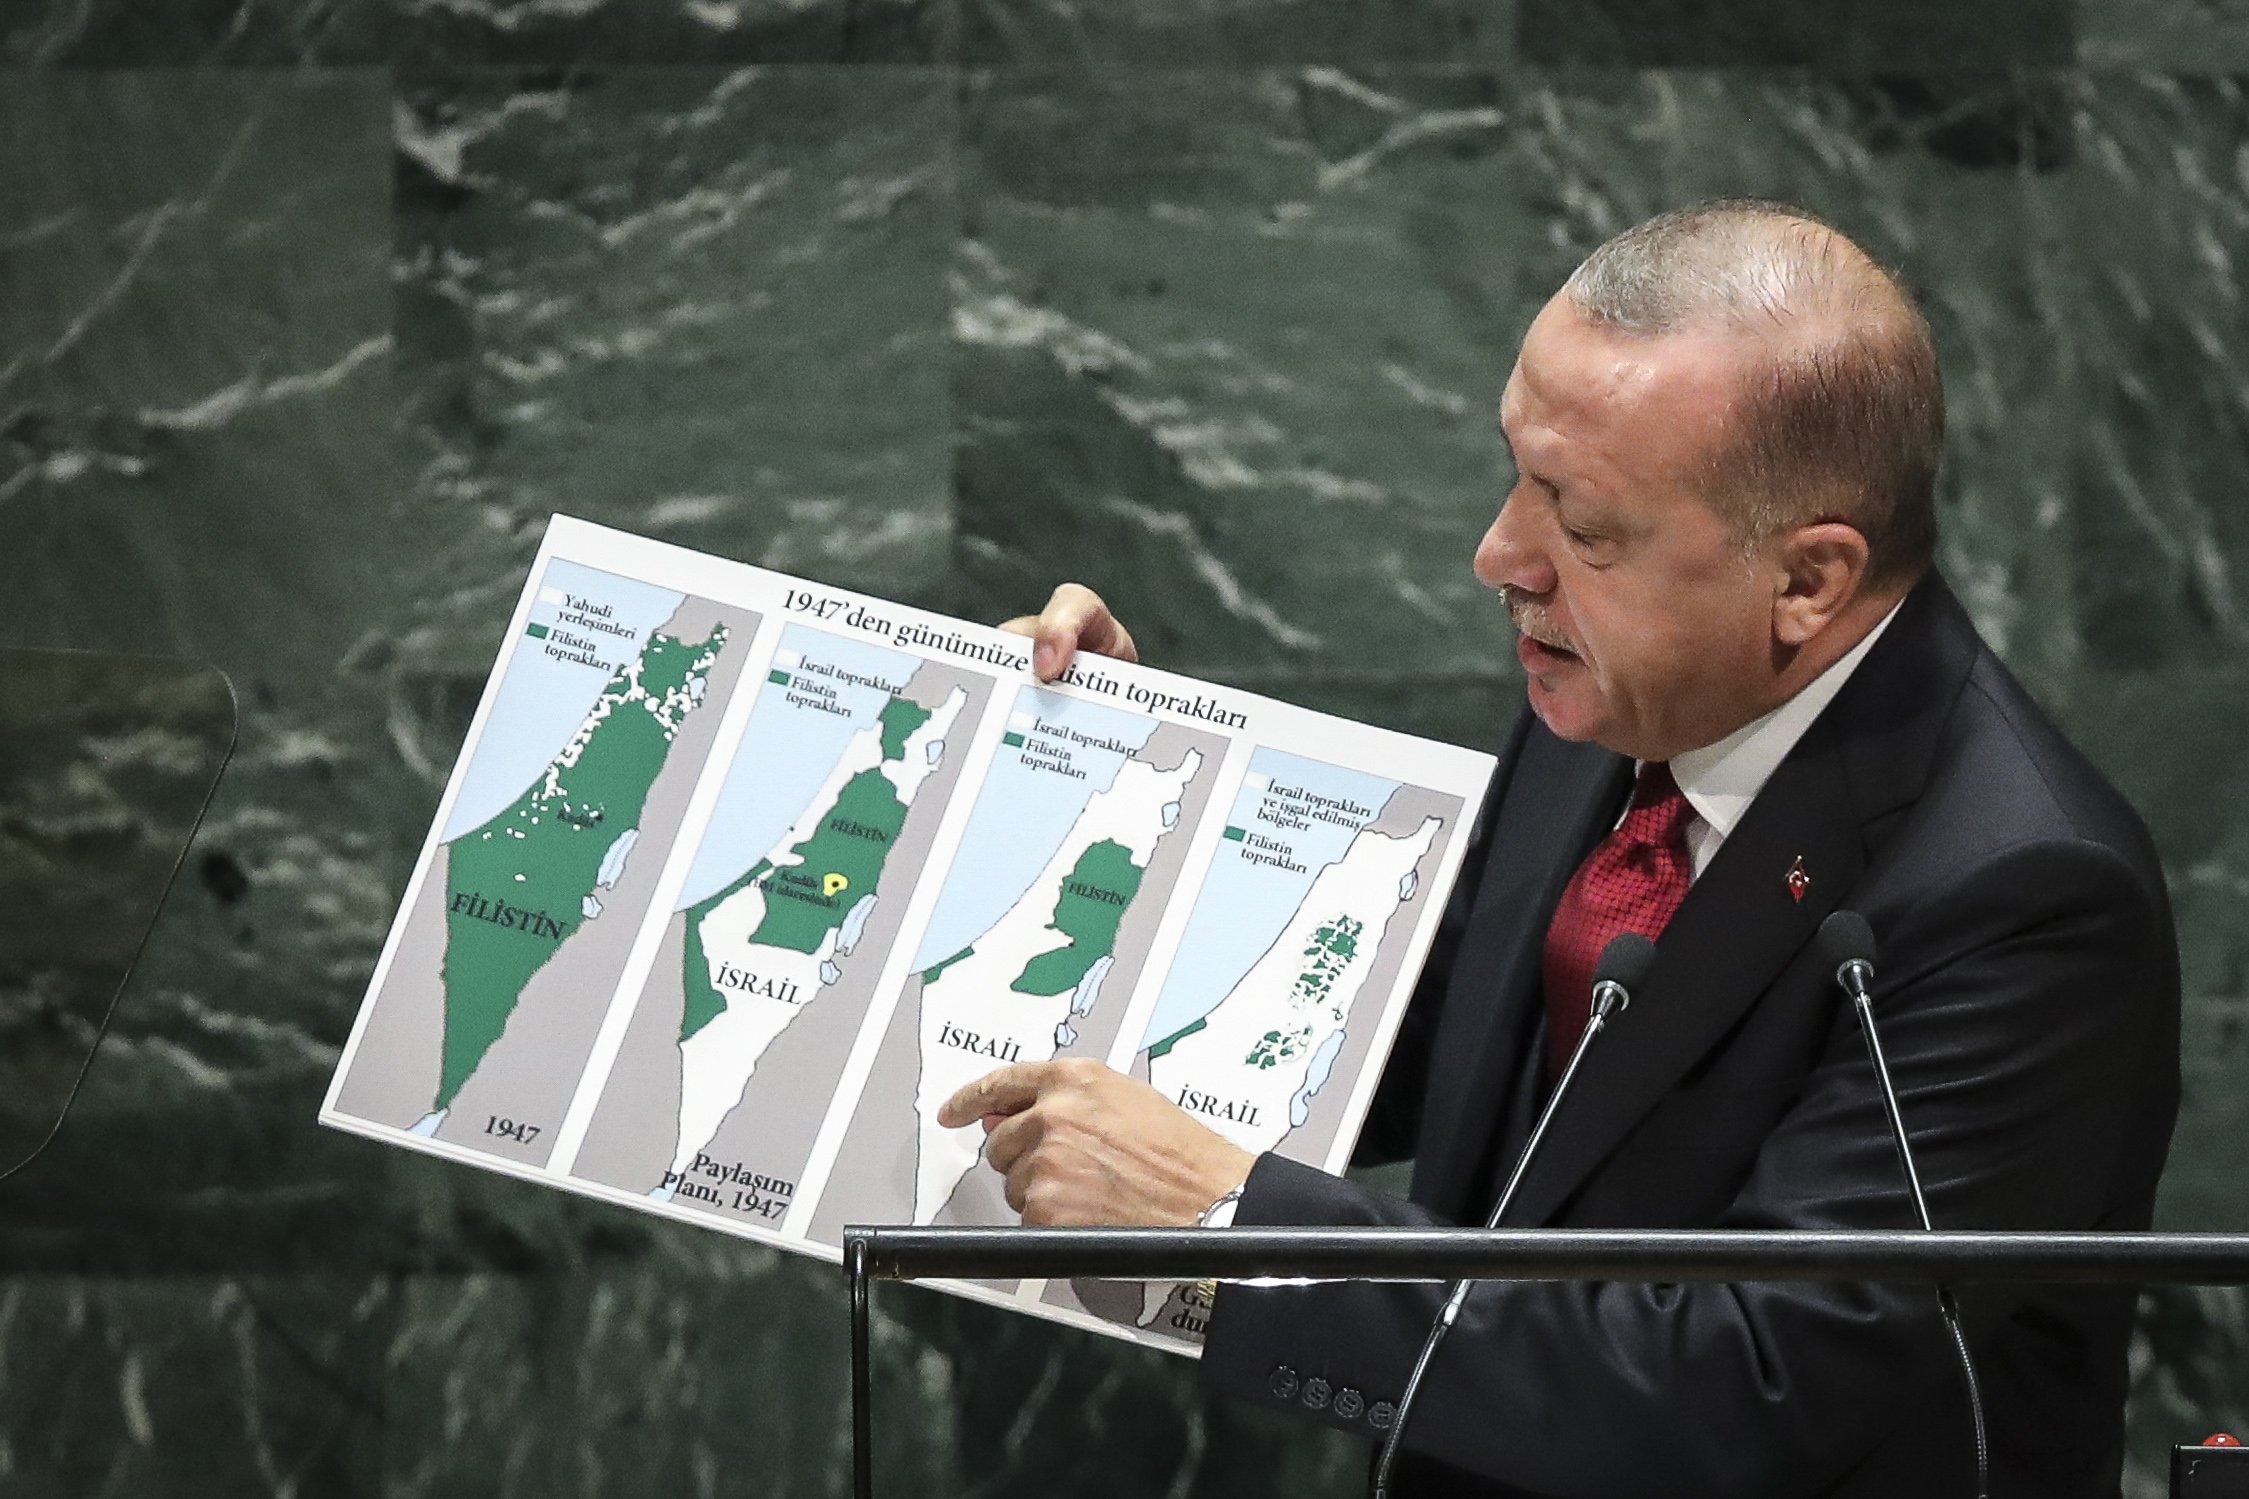 President Recep Tayyip Erdogan holds up a map of Israel since 1947 showing changing population of territory under Israeli rule while speaking to the U.N. General Assembly at U.N. headquarters, New York City, U.S., Sept. 24, 2019. (Photo by Getty Images)